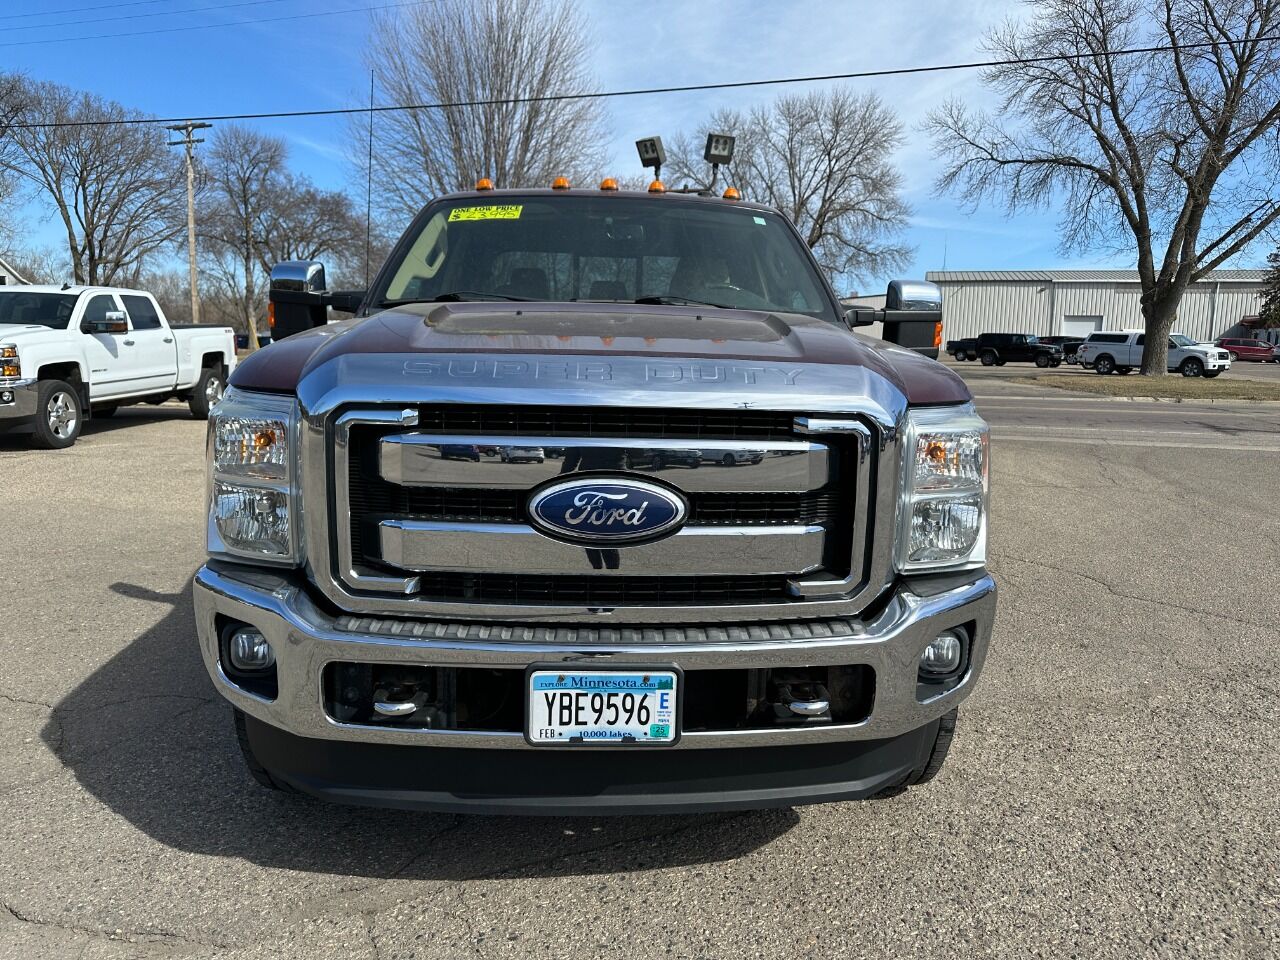 Used 2011 Ford F-350 Super Duty Lariat with VIN 1FT8W3BTXBEA62585 for sale in Faribault, Minnesota